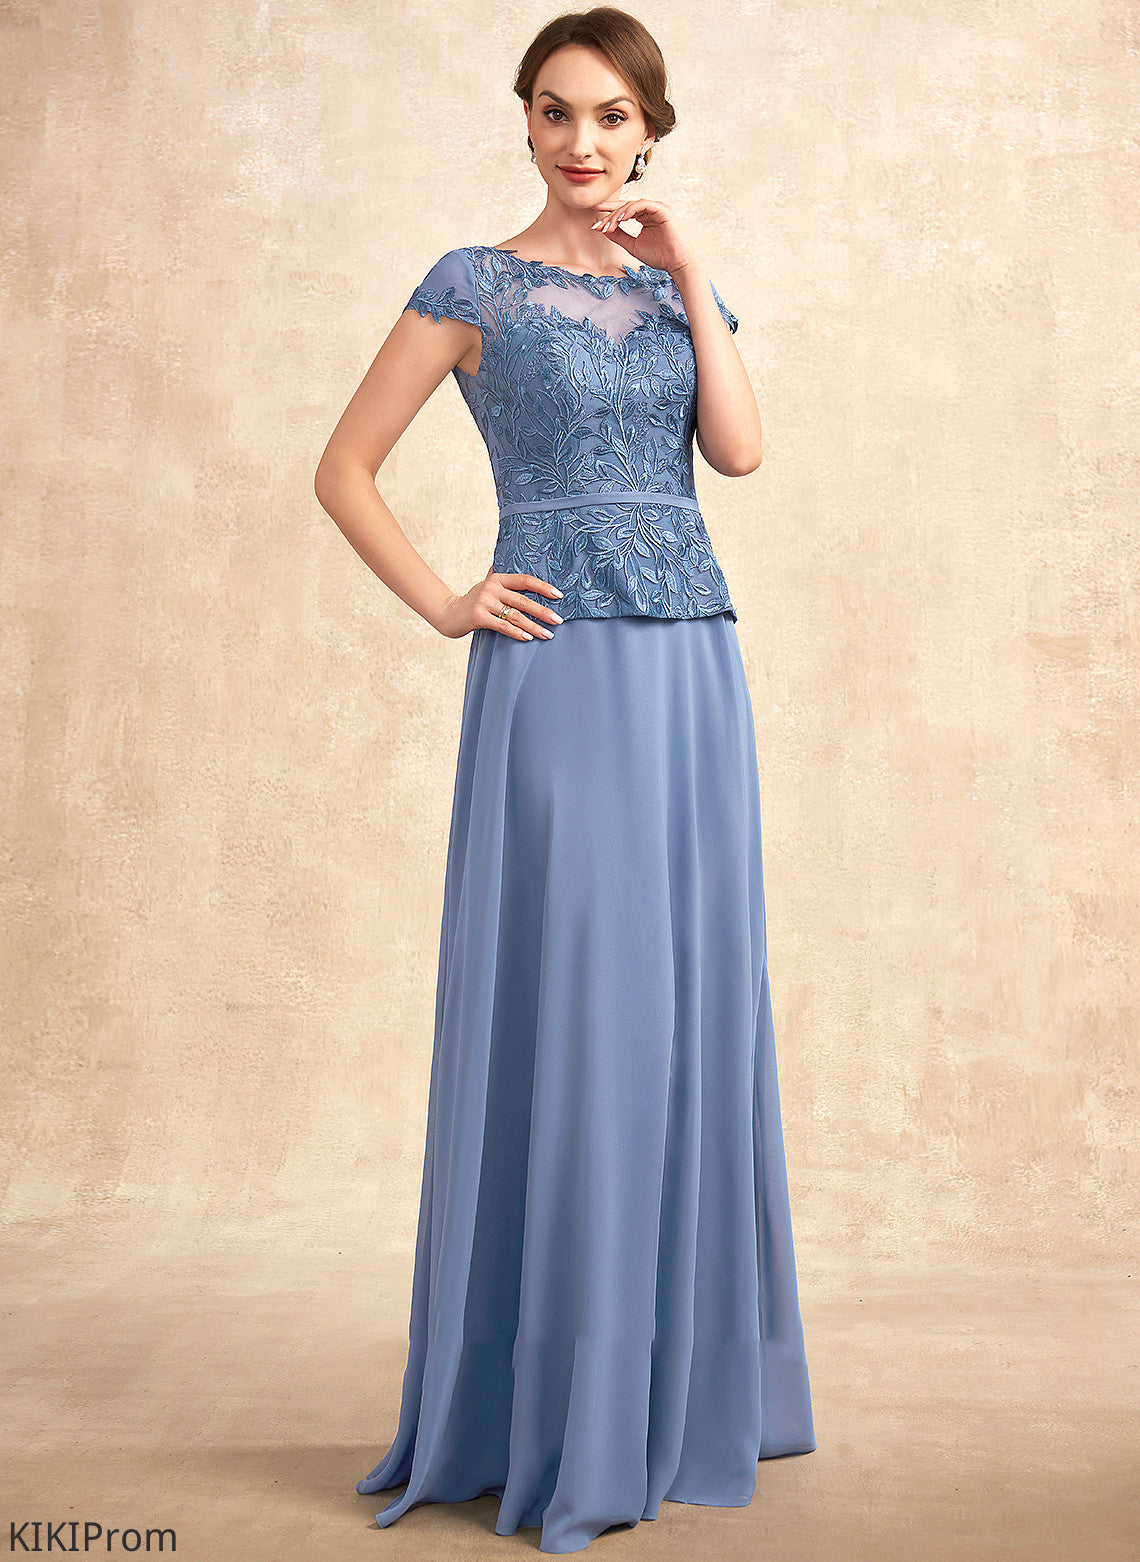 Mother Mother of the Bride Dresses of the Jemima Floor-Length A-Line Bride Neck Scoop Chiffon Lace Dress